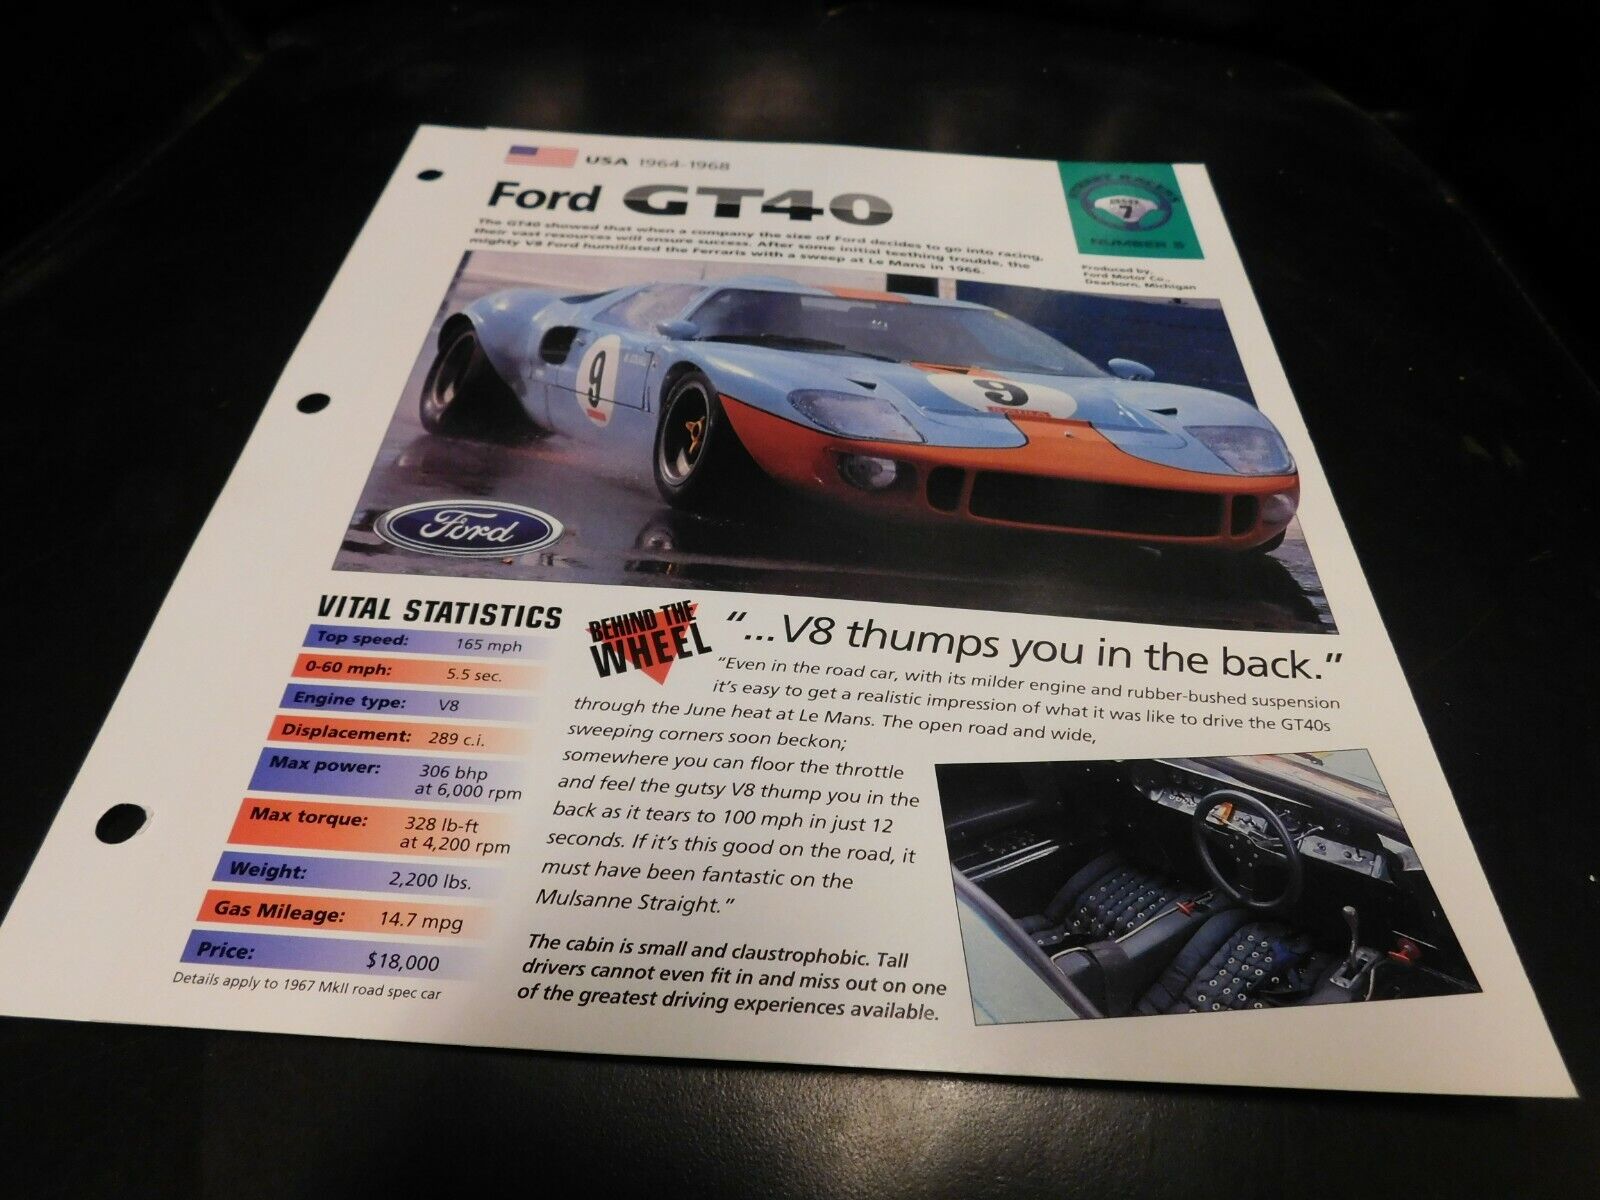 1964-1968 Ford GT40 Spec Sheet Brochure Photo Poster 1965 1966 1967